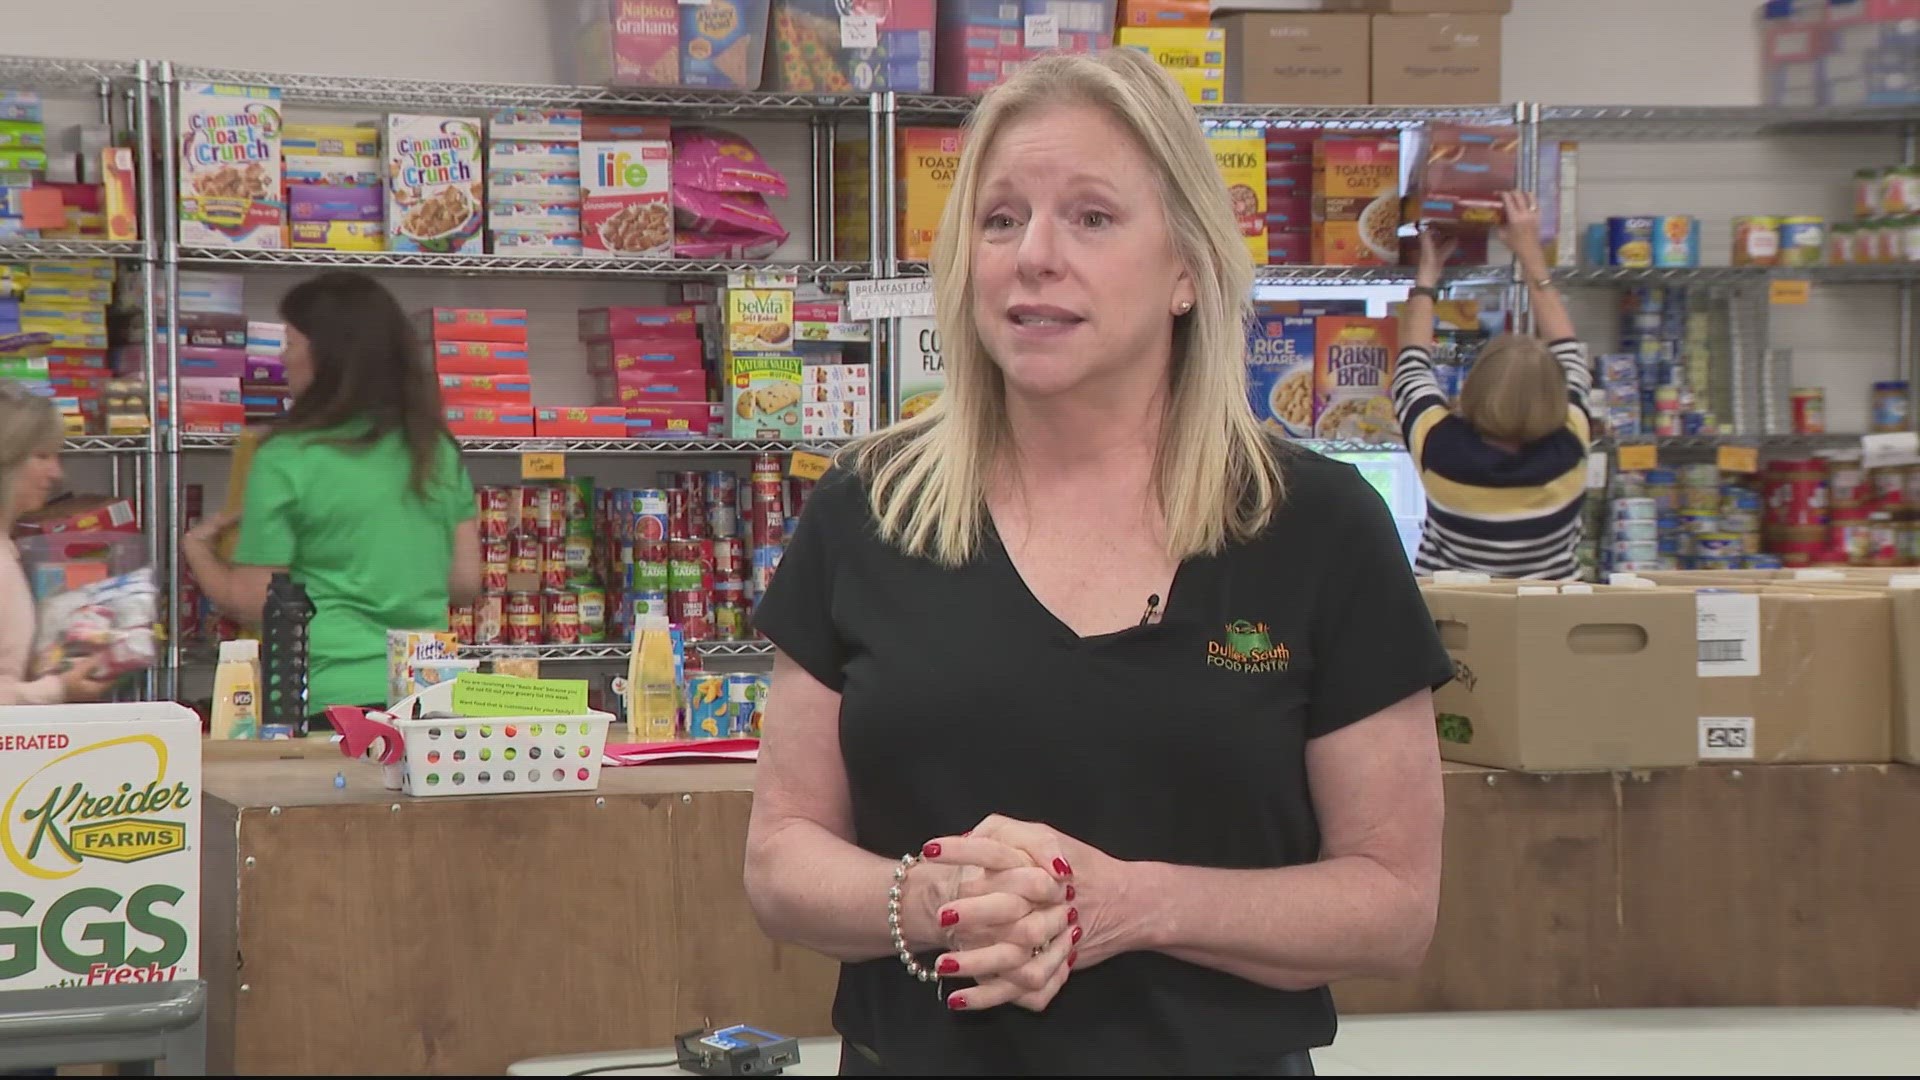 Karen Ergenbright is the Executive Director of the Dulles South Food Pantry in Loudoun County, Virginia.